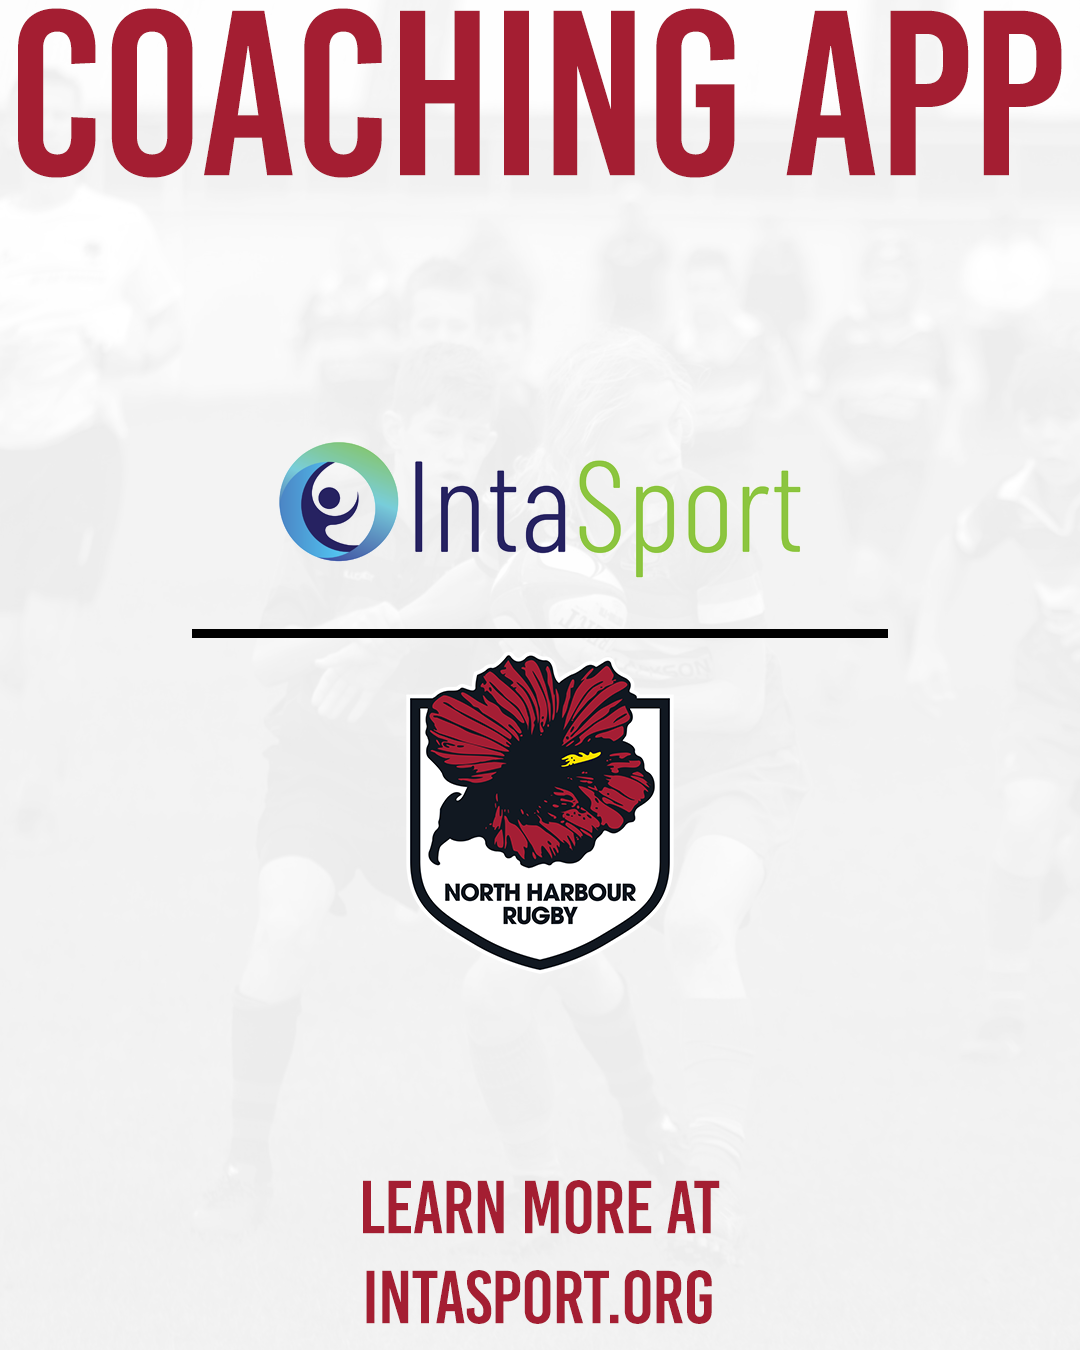 North Harbour Rugby Announces Collaboration with IntaSport Coaching App